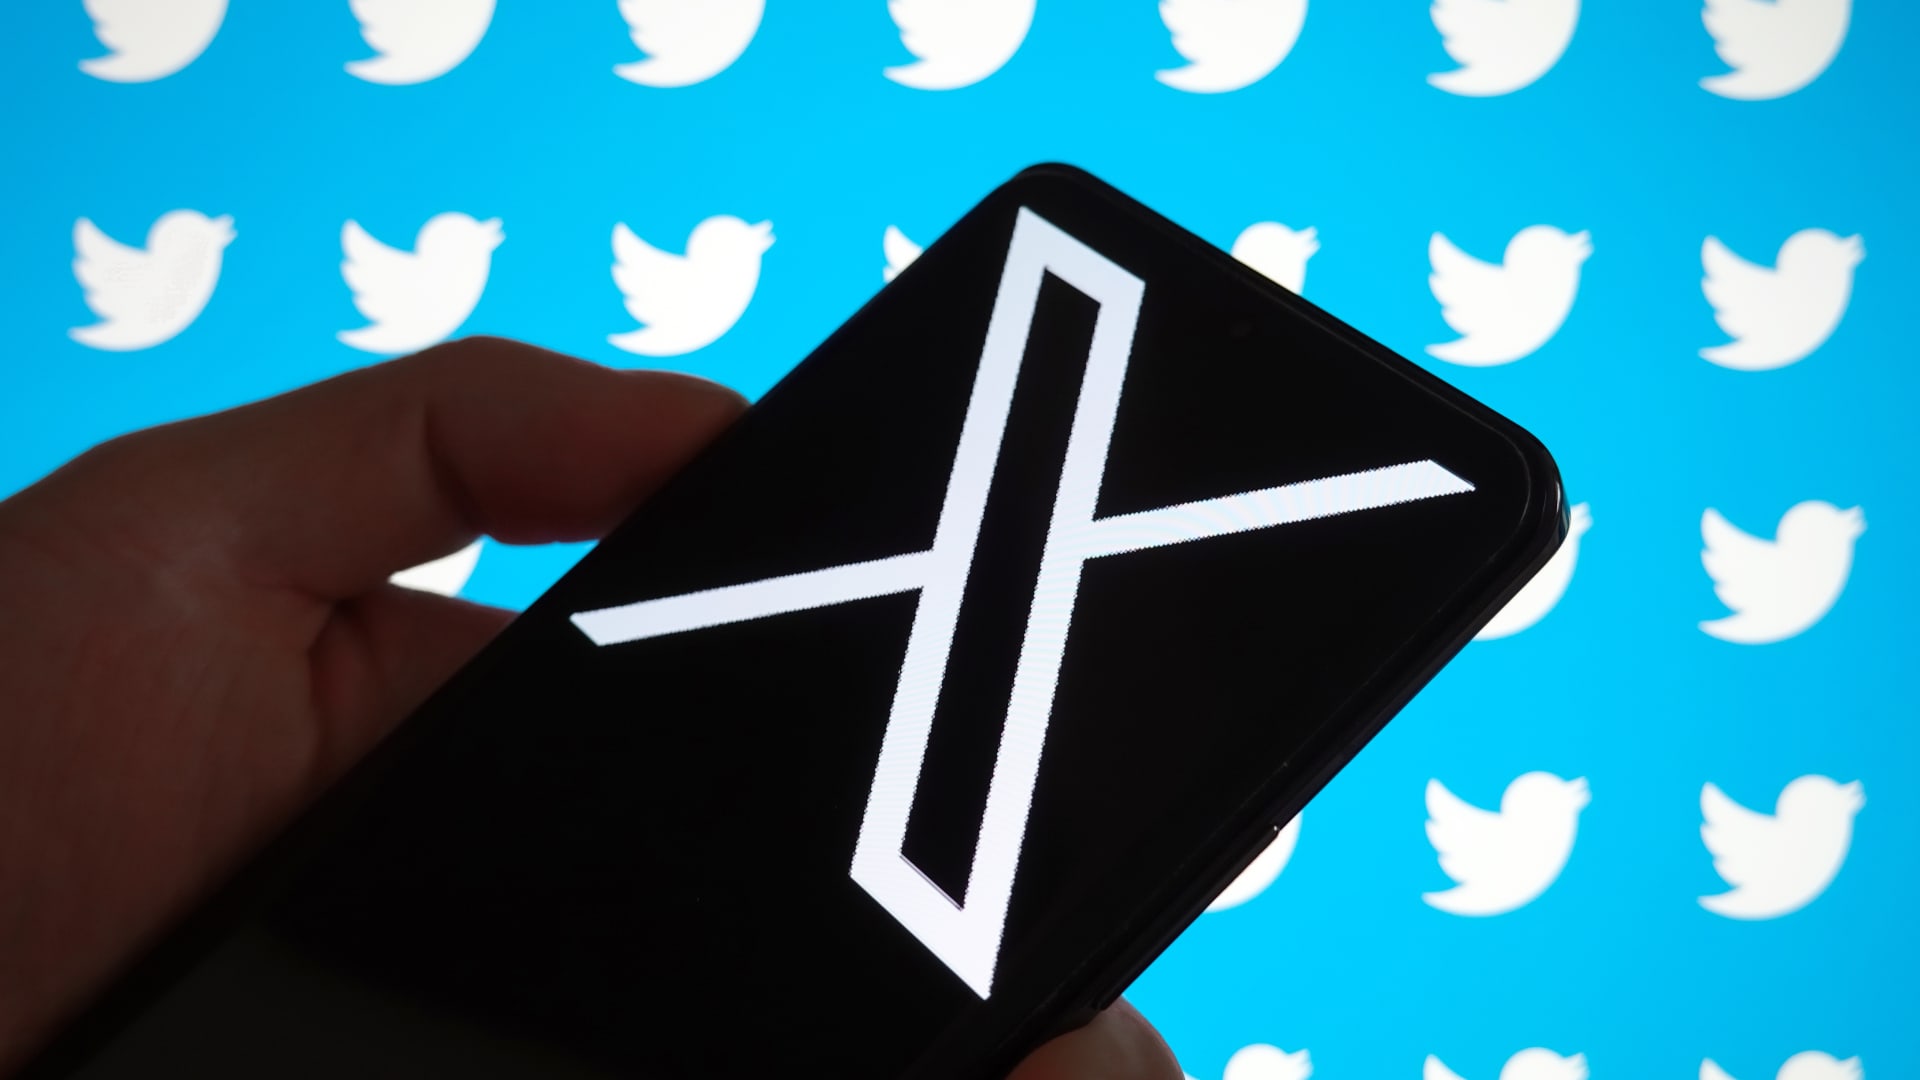 Read Twitter CEO Linda Yaccarino's message to staff about the 'X' rebrand